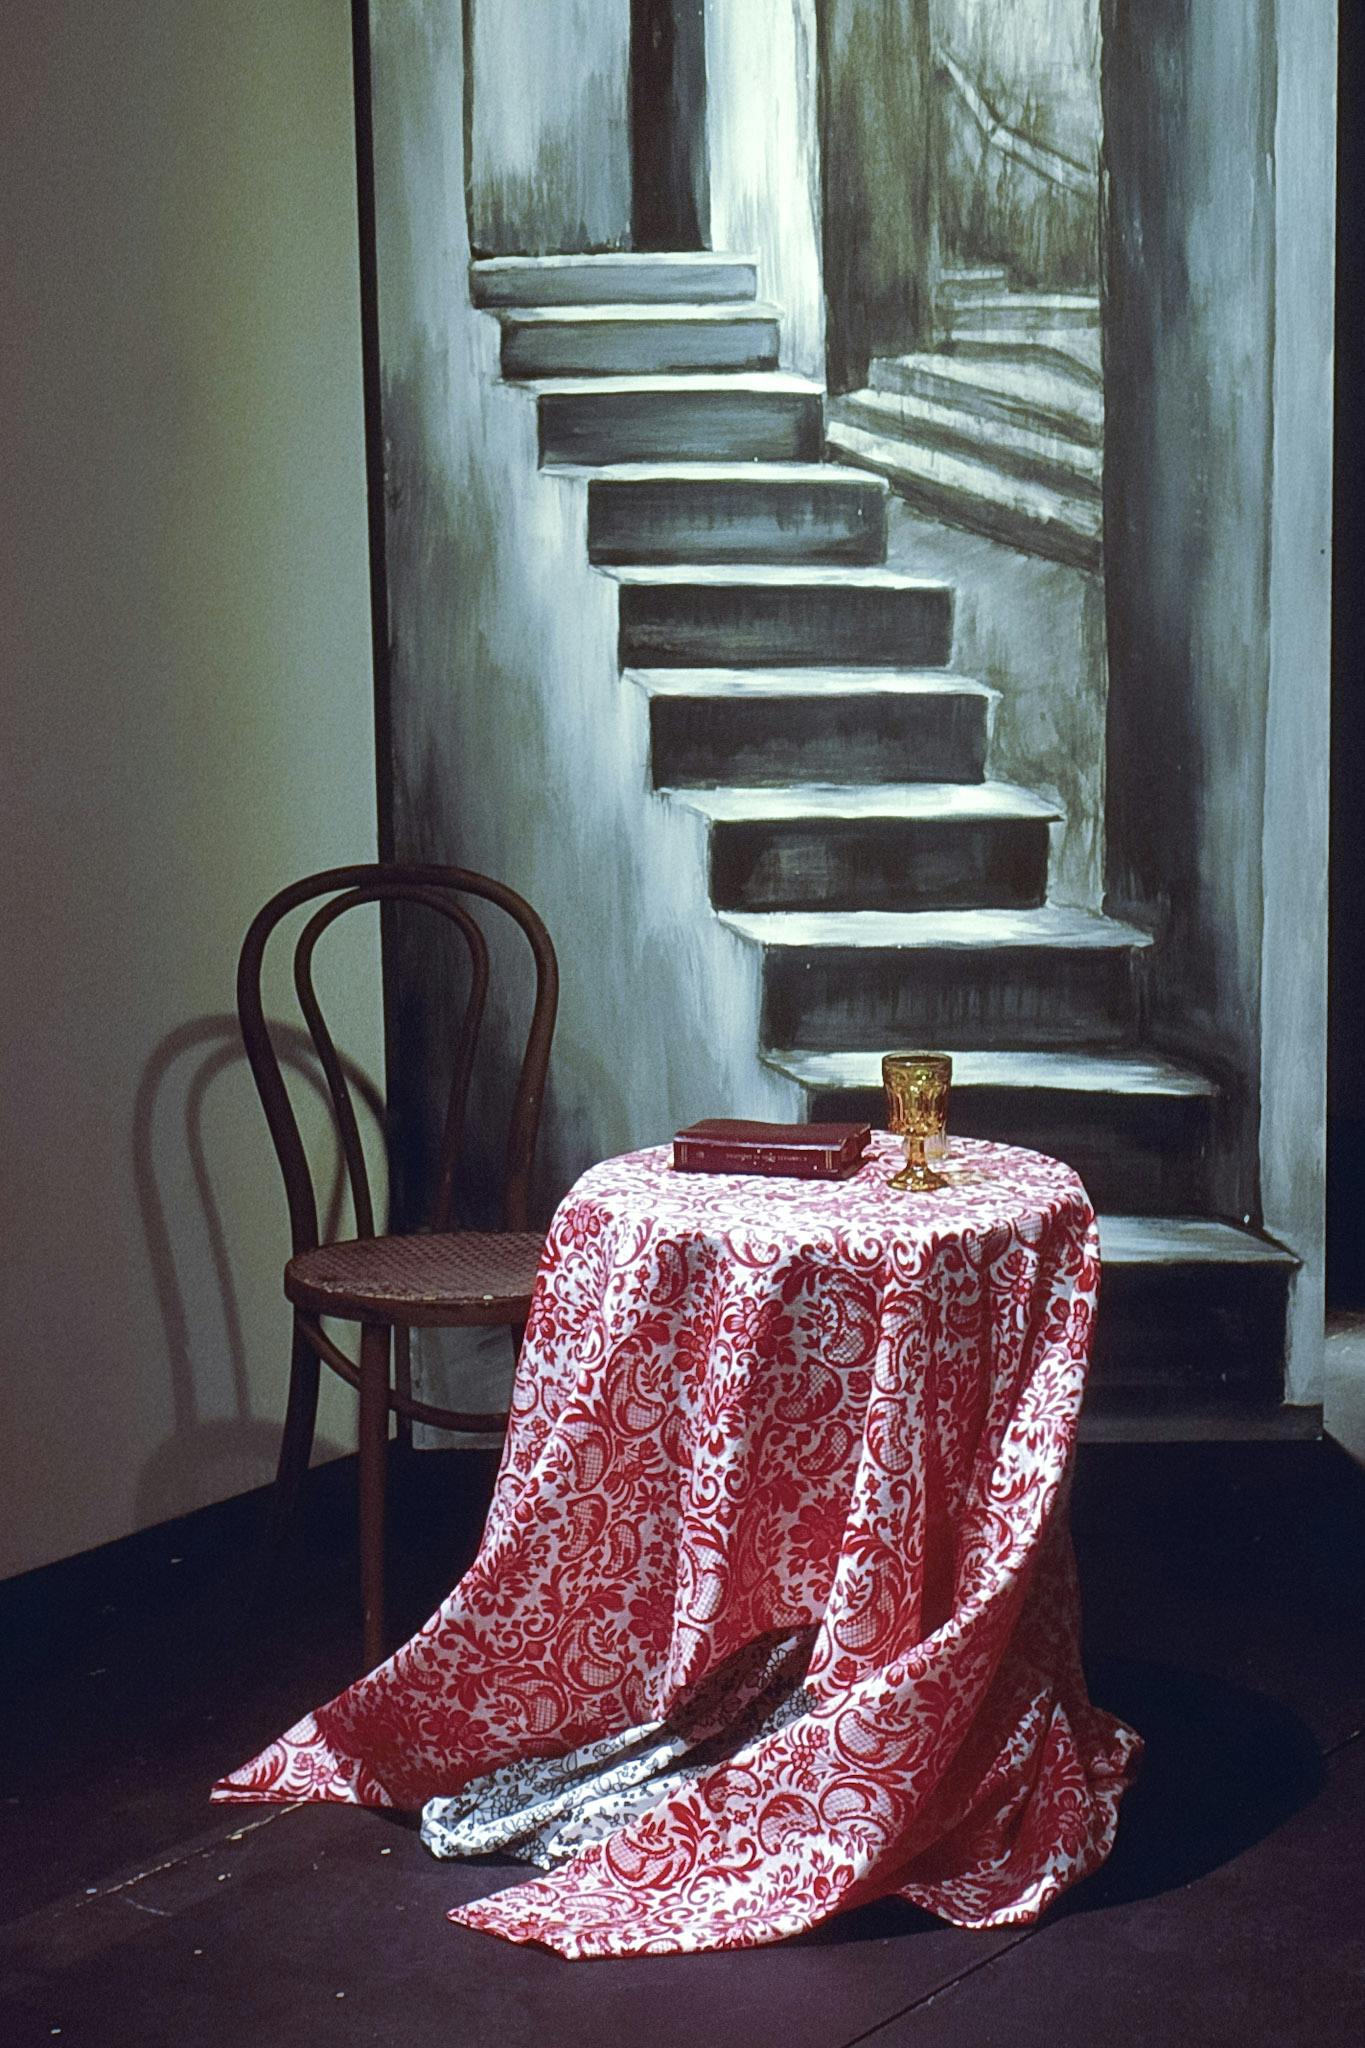 A small round table and a wooden chair are on a corner of the theatre stage. A red botanical-patterned tablecloth covers the table, on which a vintage wine glass and a book are placed.